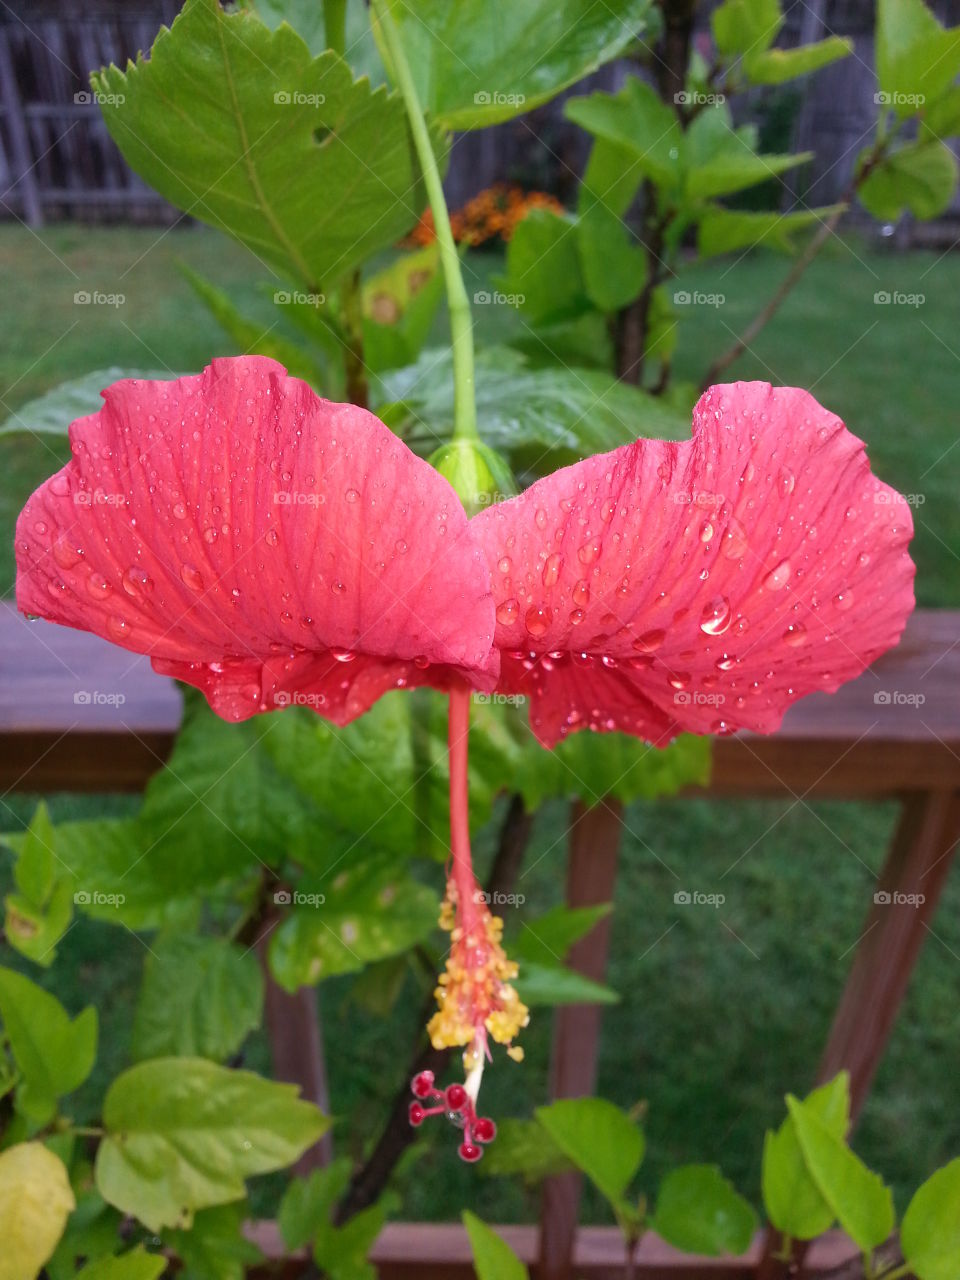 After a Heavy Rain on Delicate Hibiscus